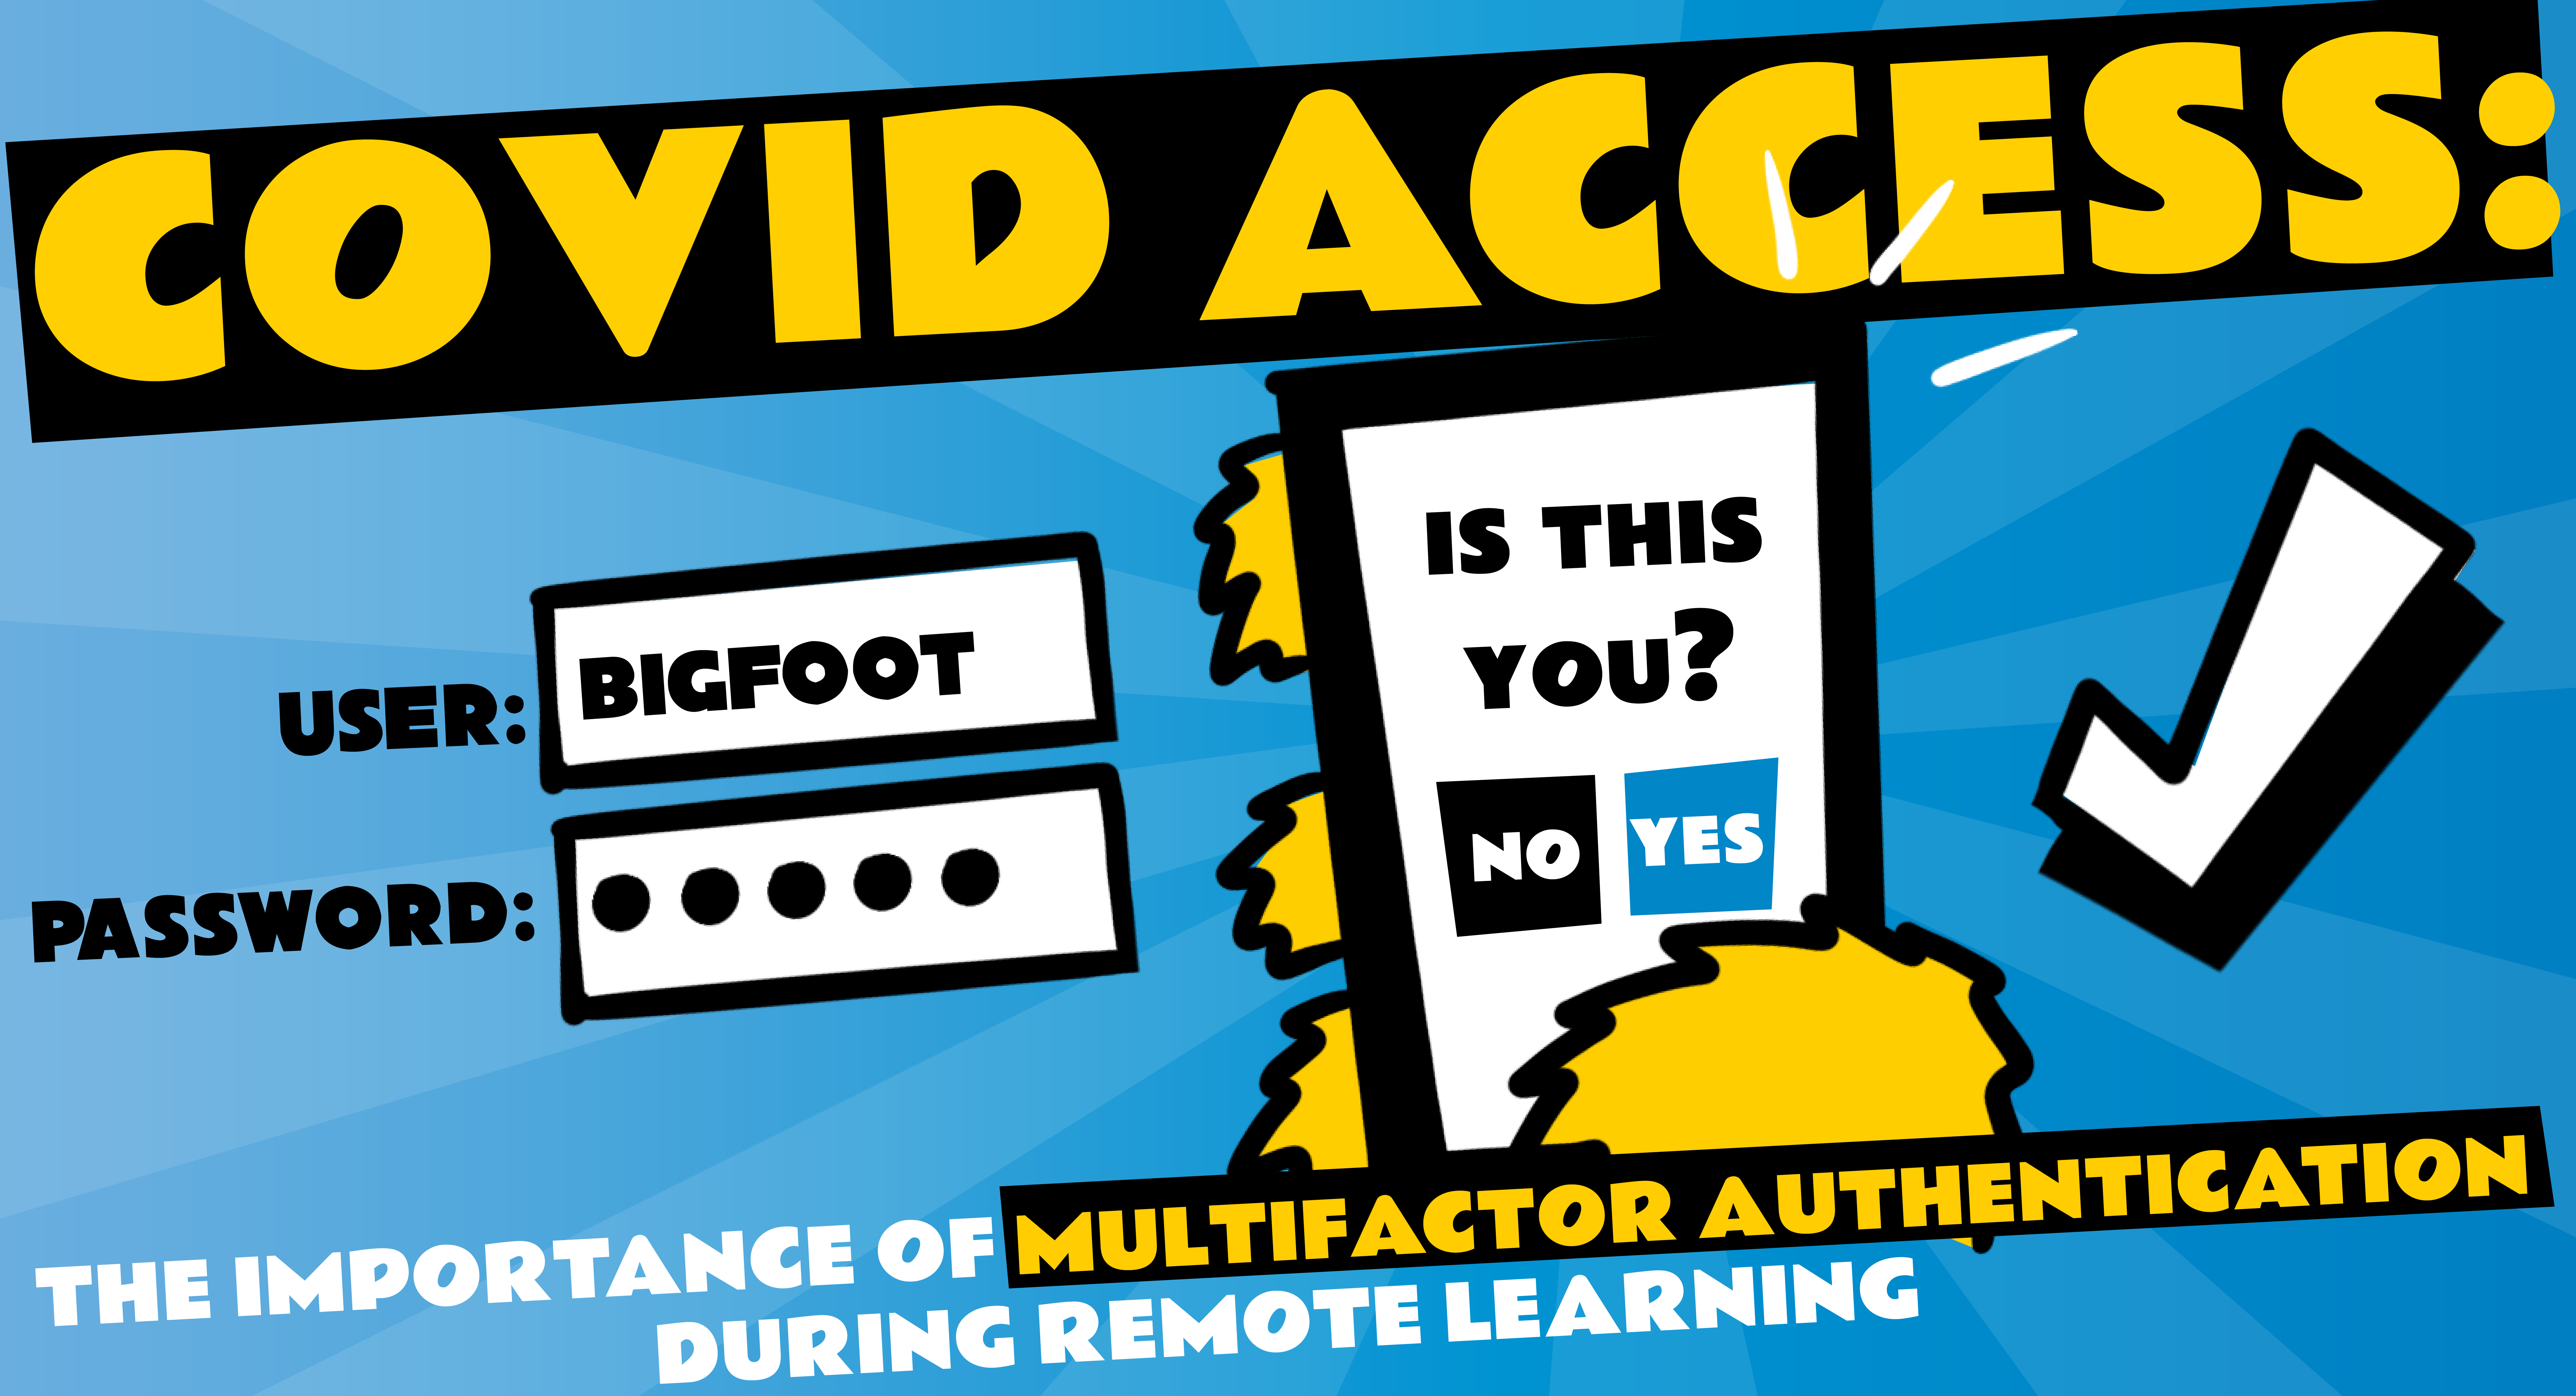 COVID Access: The Importance of Multifactor Authentication During Remote Learning